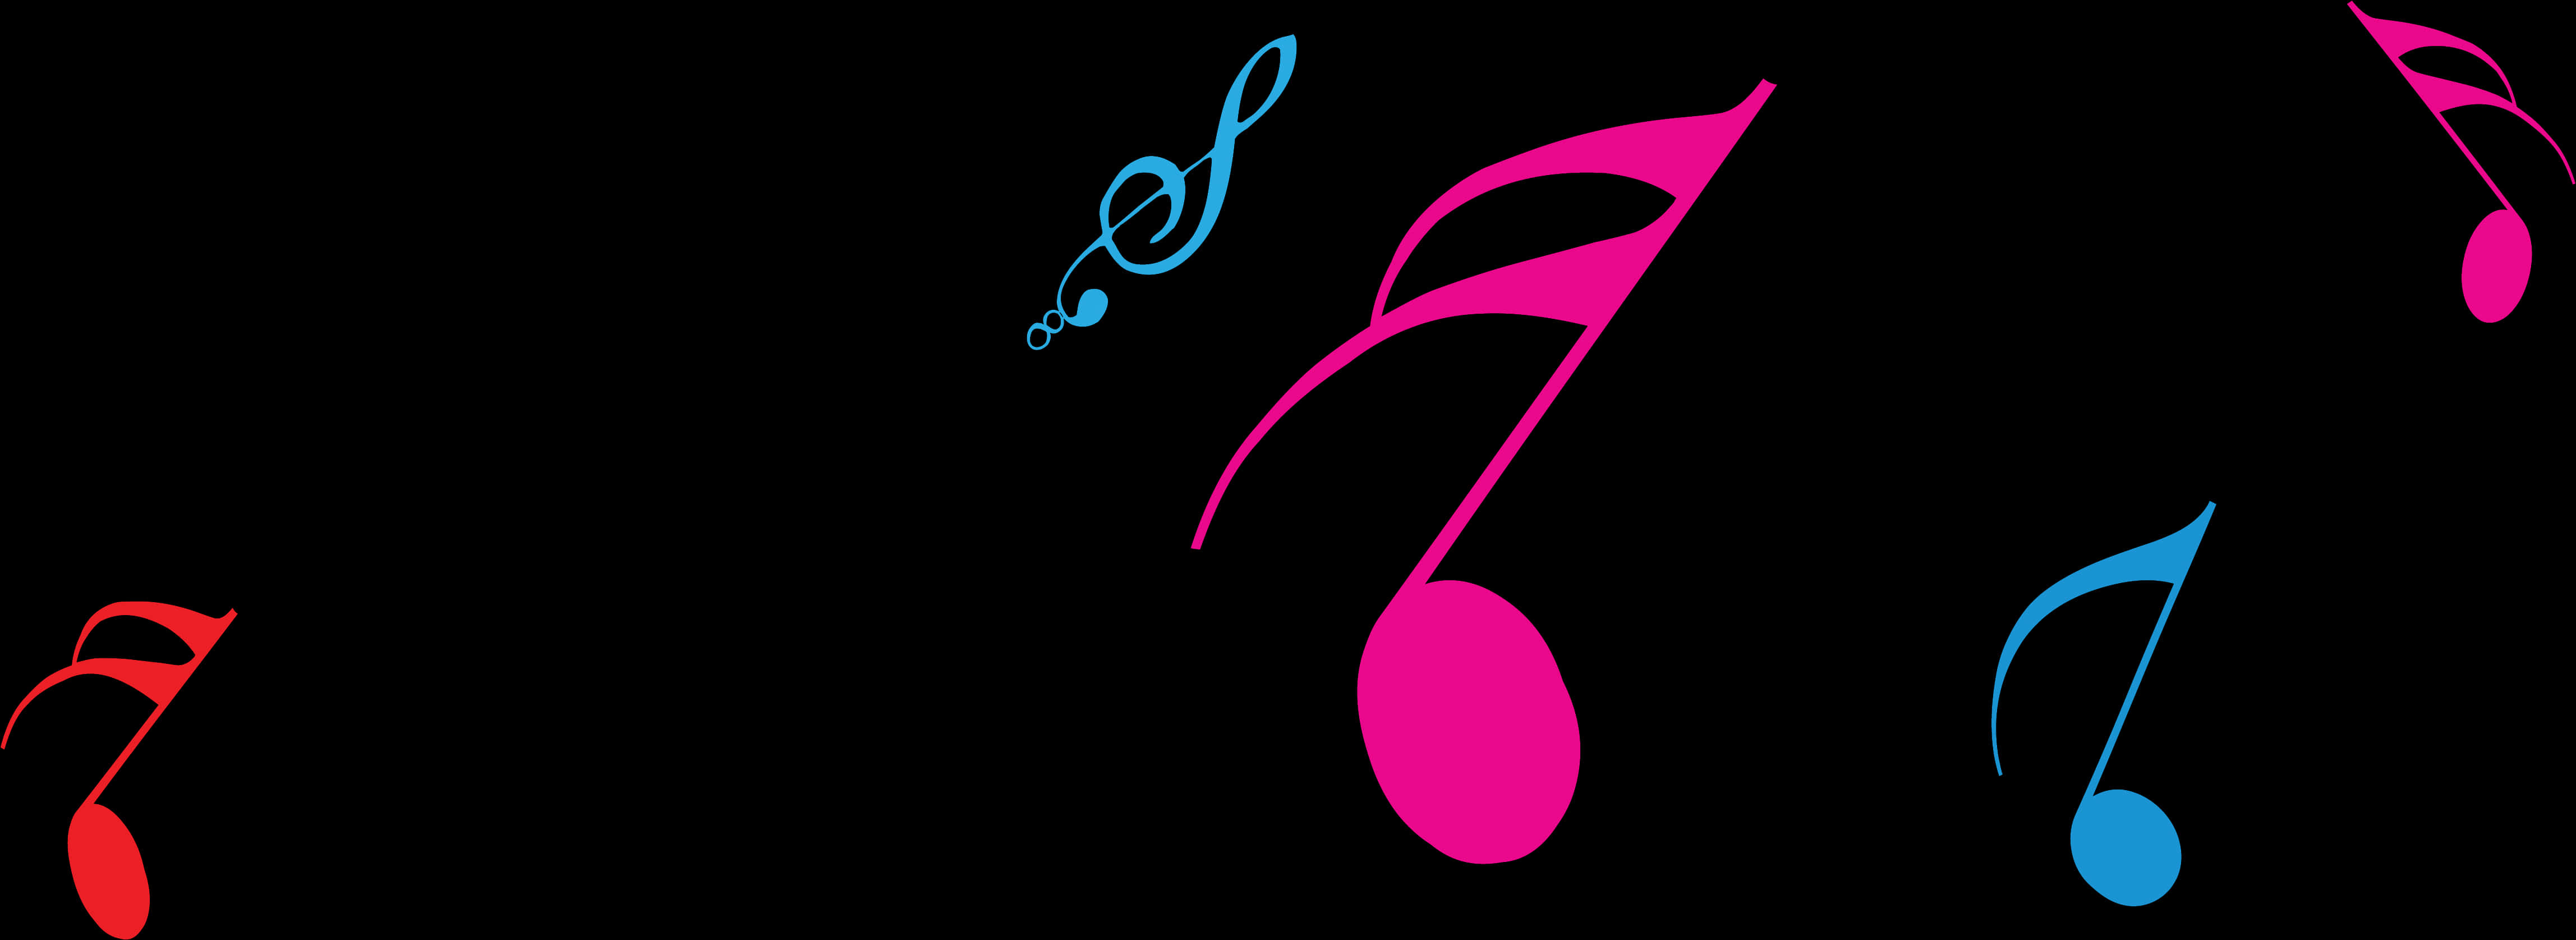 A Pink And Blue Music Note